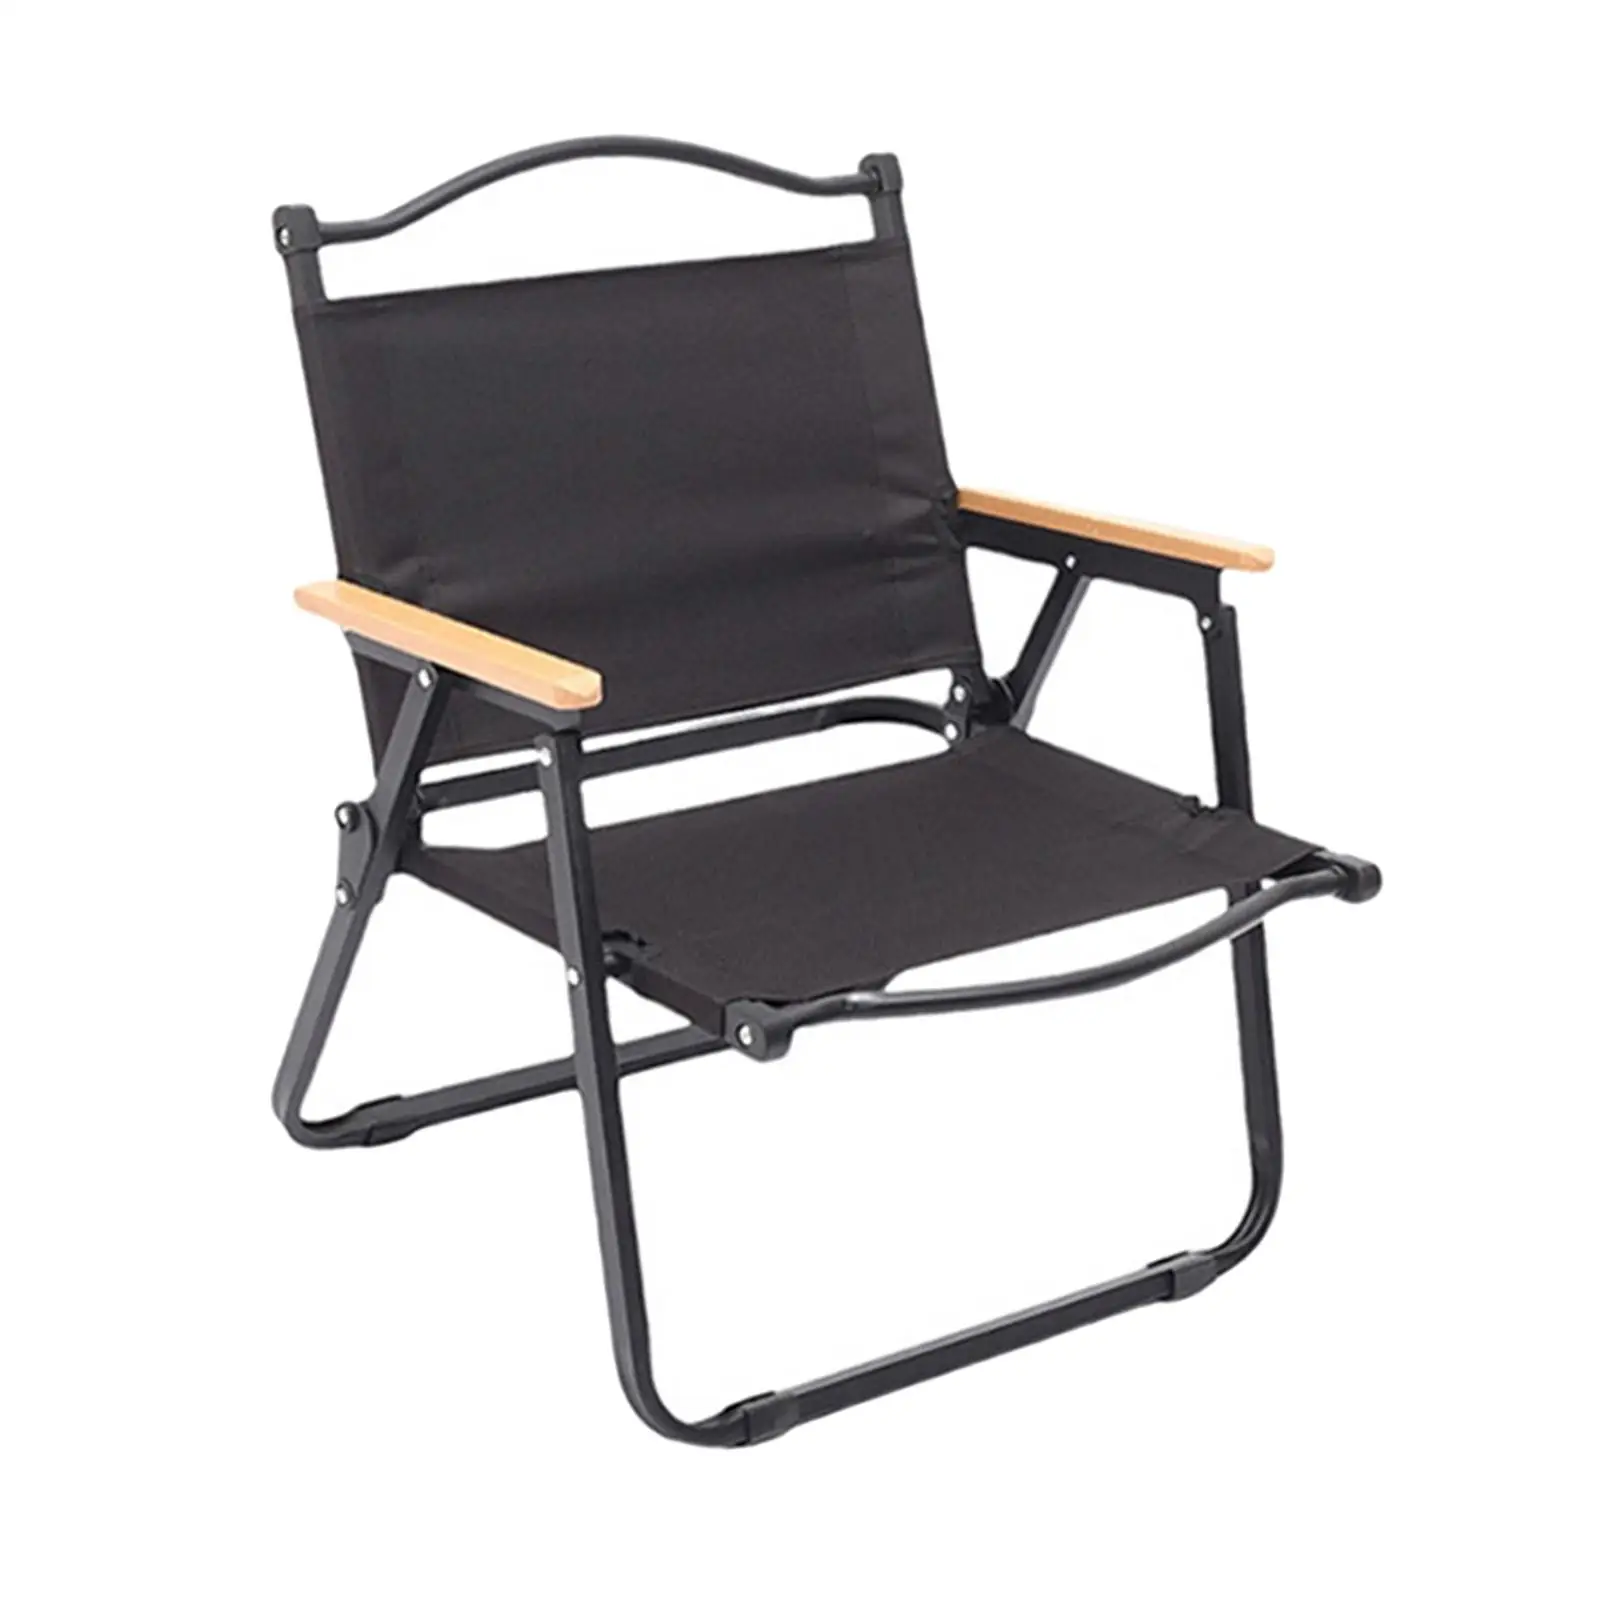 Camping Folding Chair Holds 500lbs Heavy Duty Outdoor Furniture for Lawn Beach Patio